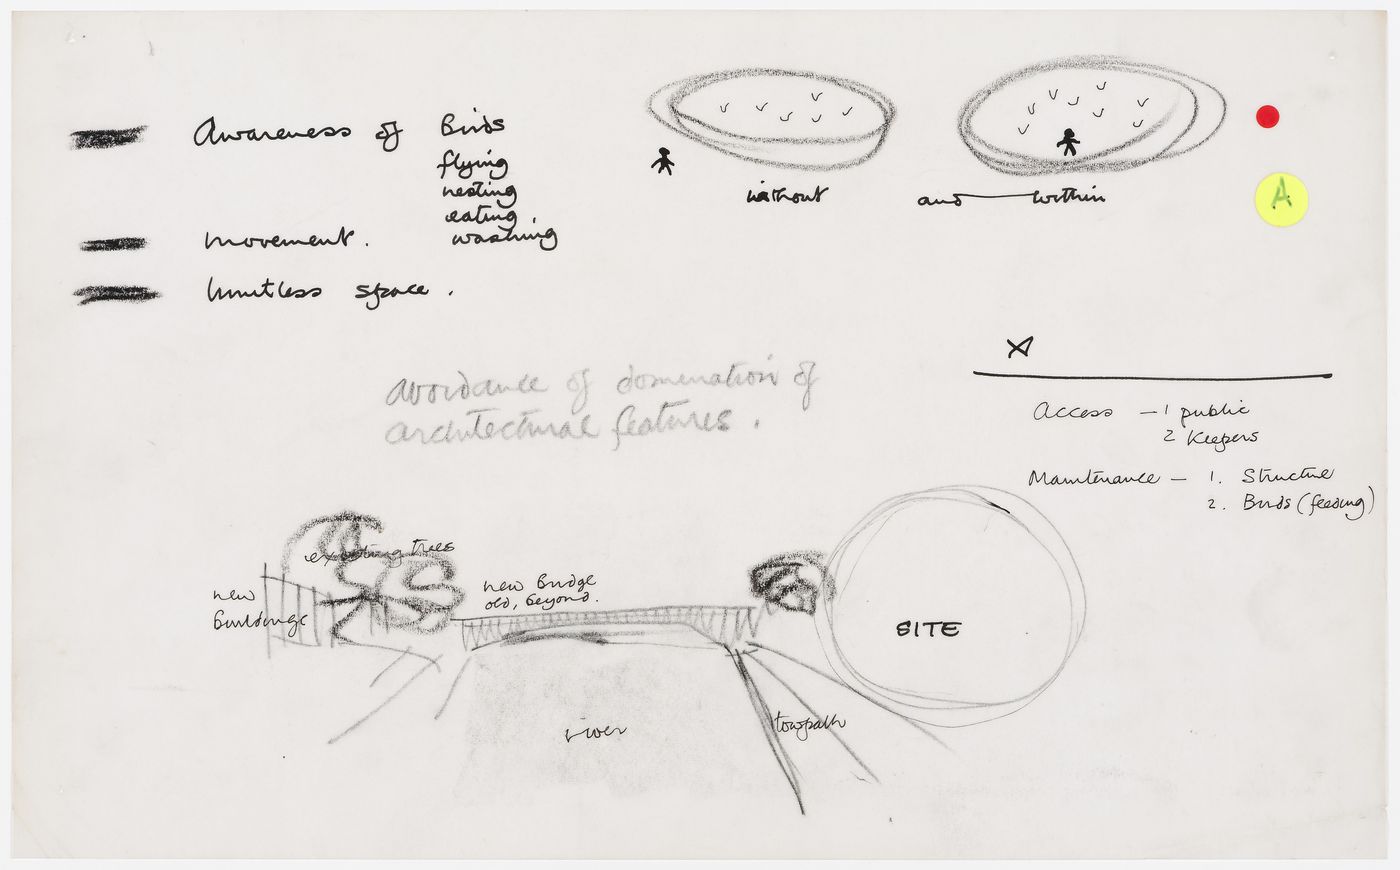 Conceptual notes and sketches for the Aviary at the London Zoo, London, England